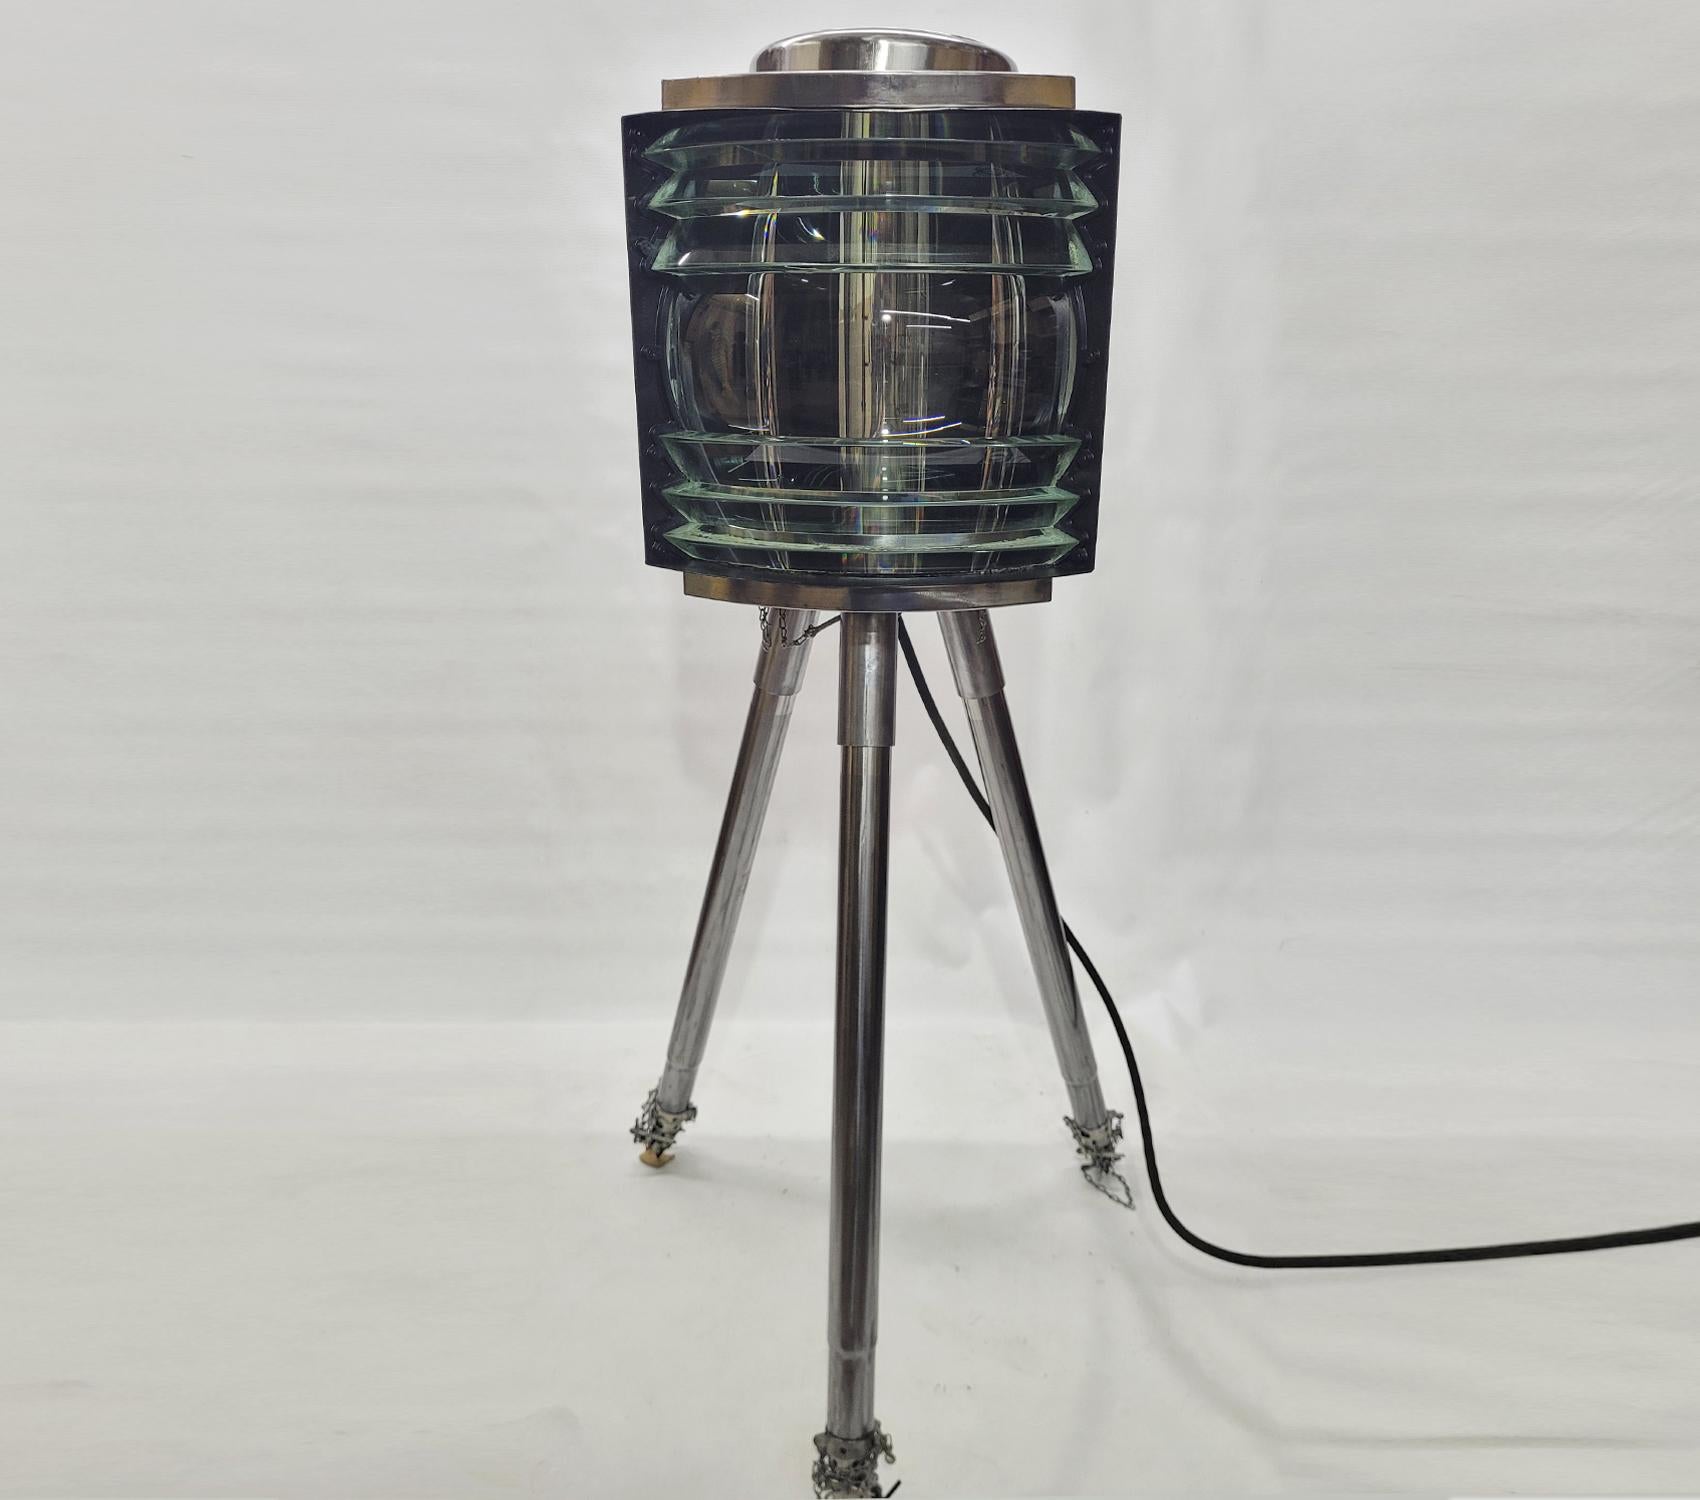 Powerful military range beacon with bulbs and sockets. Immense light beam from this meticulously polished unit. The paint has been stripped and the steel is polished. Three adjustable legs can be raised and lowered. Rewired. With original hinged